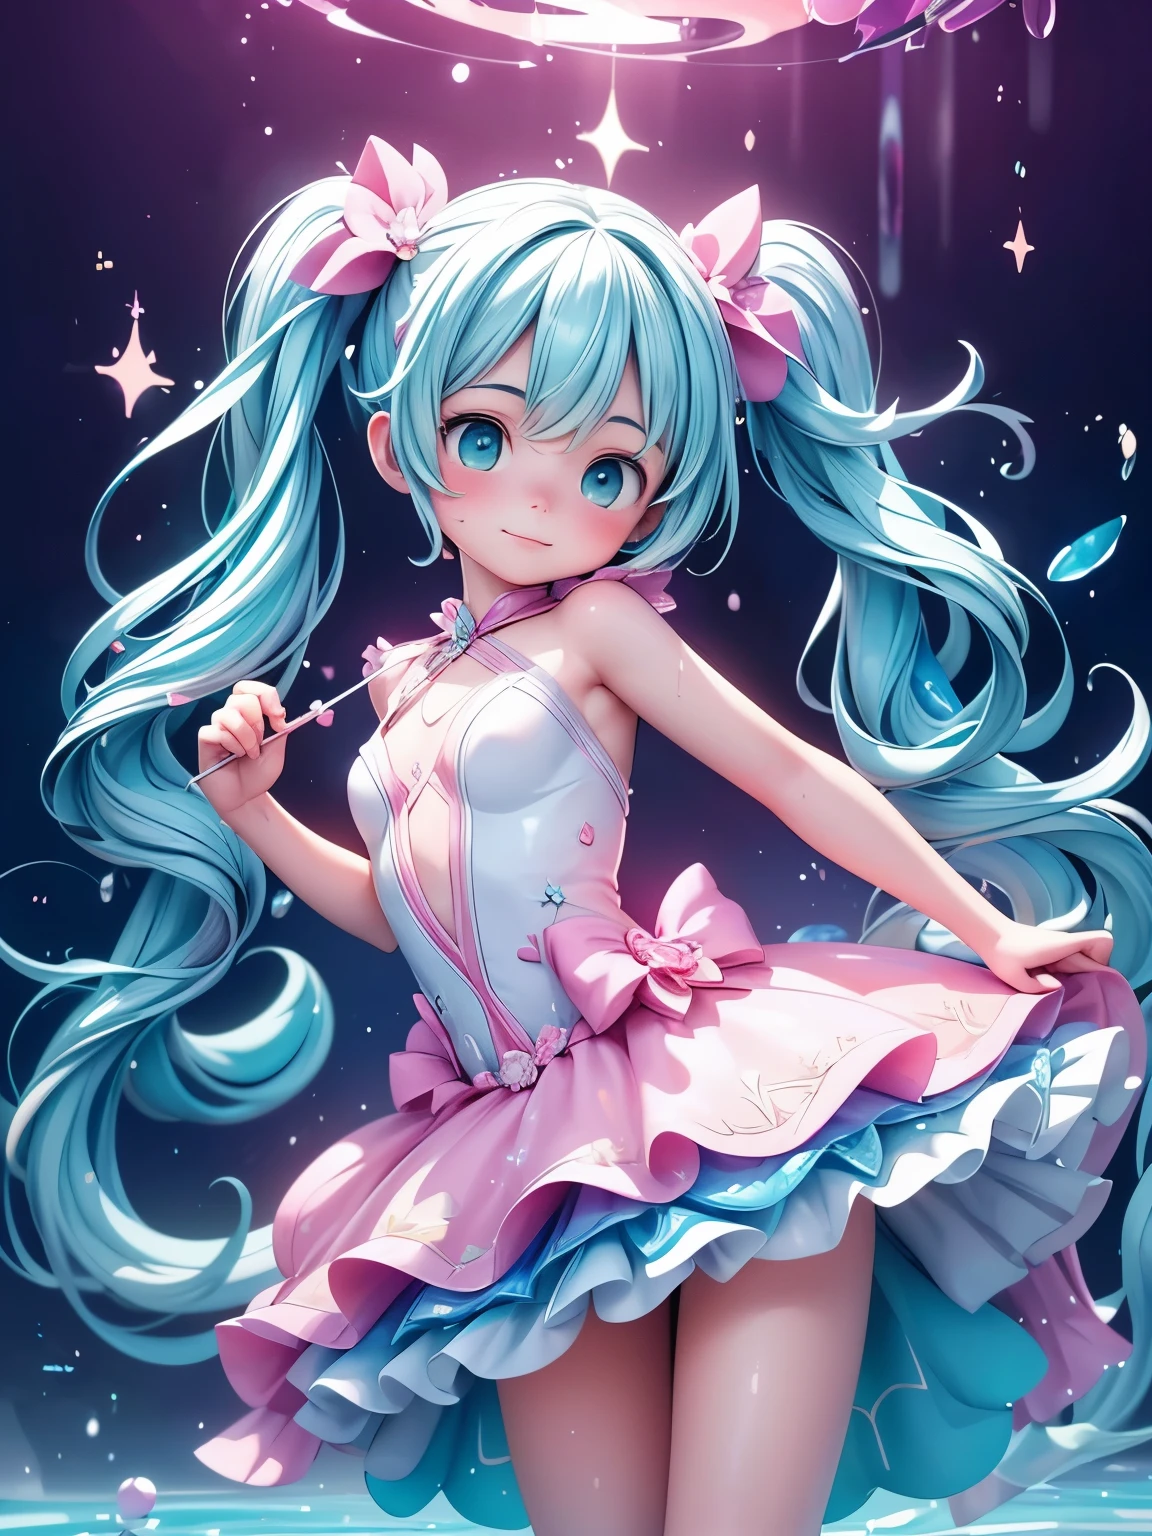 (masterpiece、highest quality、highest quality、Official Art、Beautiful and beautiful:1.2)、(One girl:1.3)Hatsune Miku、Twin tails,Big Breasts,beautiful girl,  White ball gown, Vibrant pastel colors, (colorful), long flowing liquid pink hair, Magic lights, sparkling Magic liquid, inspired Glen Keane, inspired By Lois Van Baarle, Disney Art Style, By Lois Van Baarle, An aura that glows around her, Glen Keane, Just a joke, Glowing Light! Digital Painting, Flowing, shiny hair, Shiny, flowing hair, Beautiful digital illustrations, Fantasia Background, Whimsical, Magic, Fantasy, ((masterpiece, highest quality)), Intricate details, Very detailed, Sharp focus, 8k resolution, Sparkling Eyes, Liquid watercolor